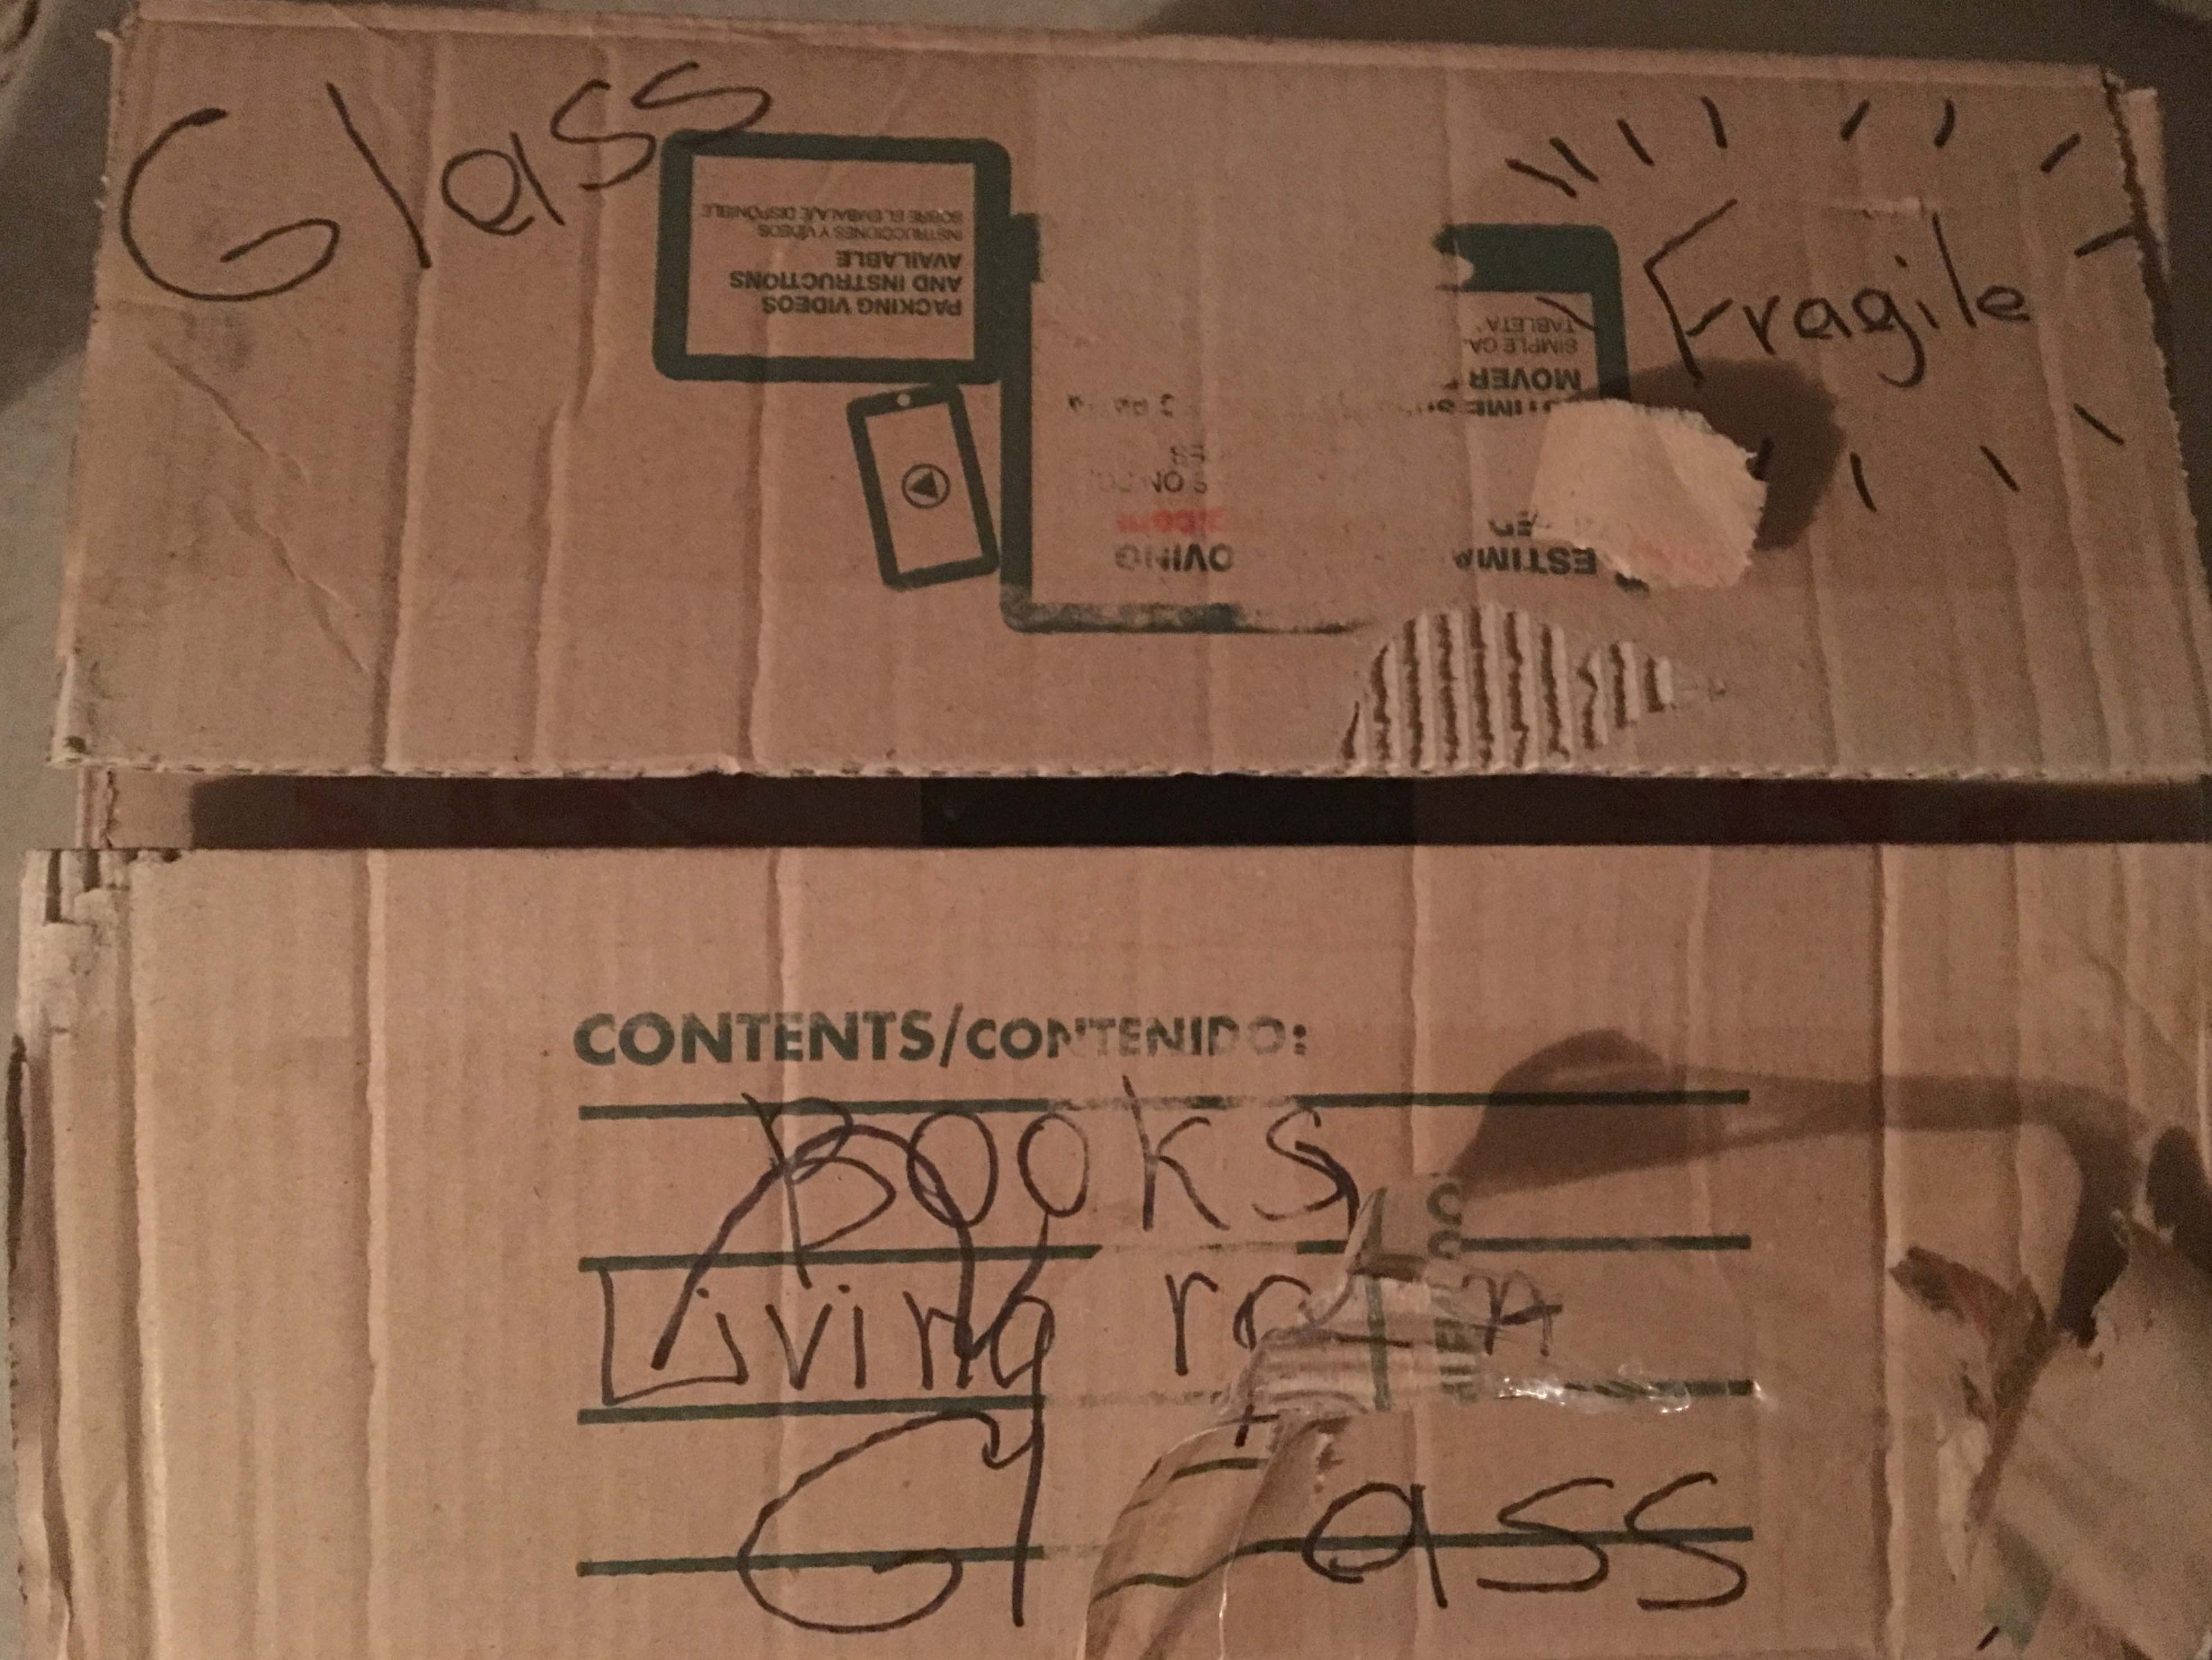 Care Paid to Boxes Labeled "Fragile" 